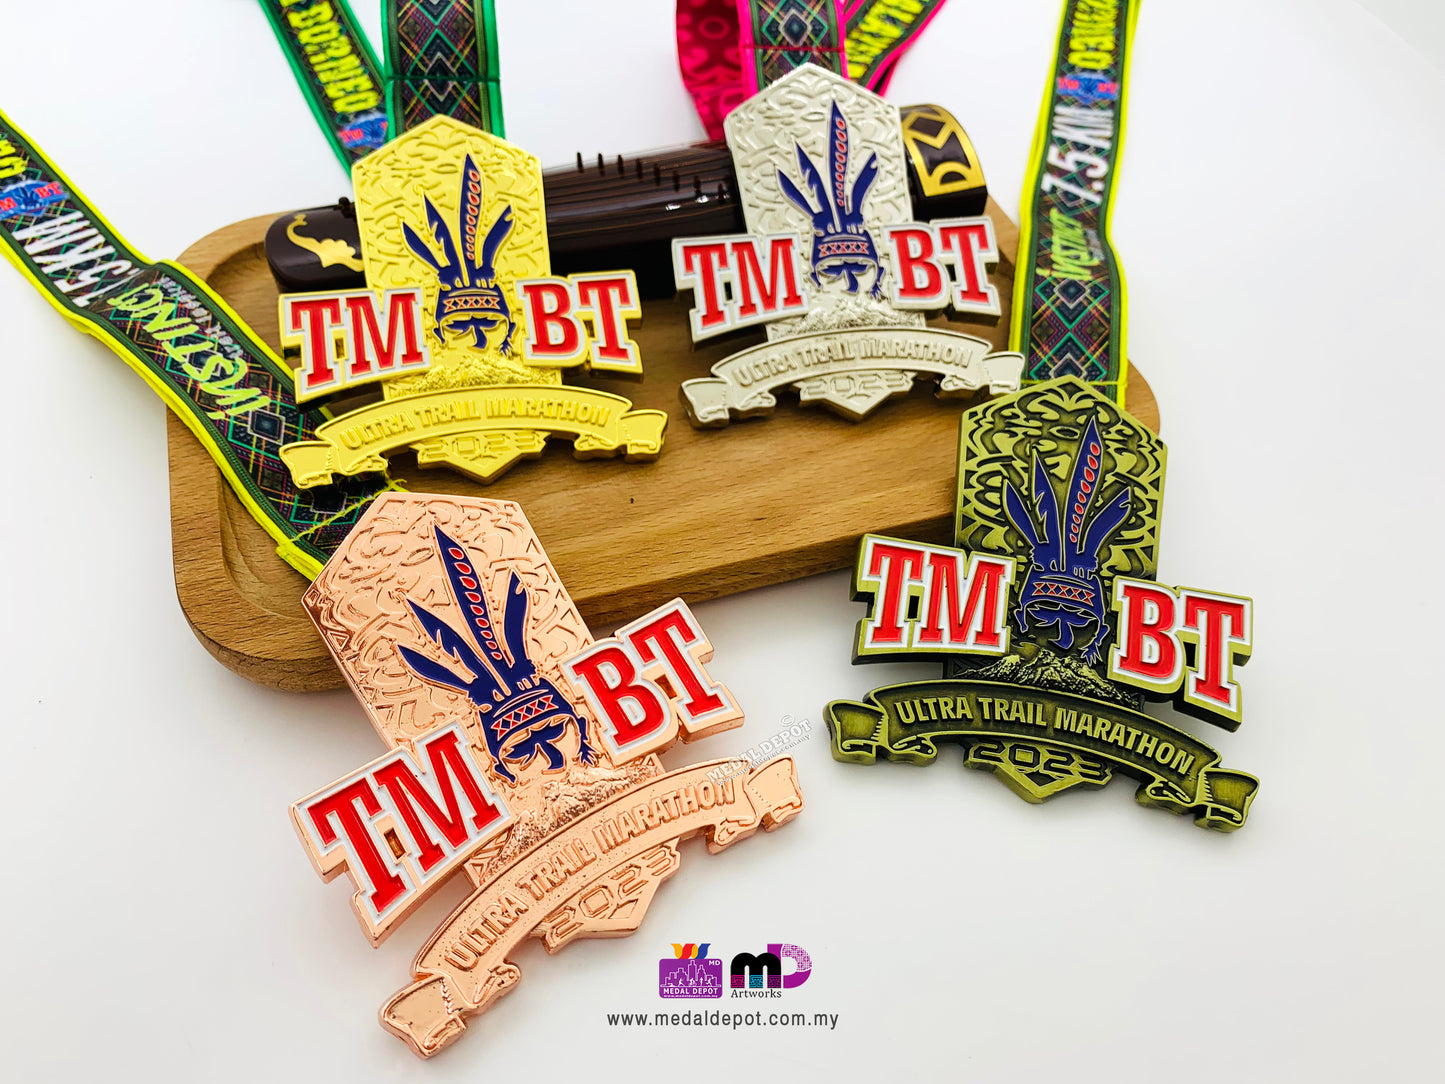 TMBT 2023 (The most beautiful thing) Ultra Trail 2023